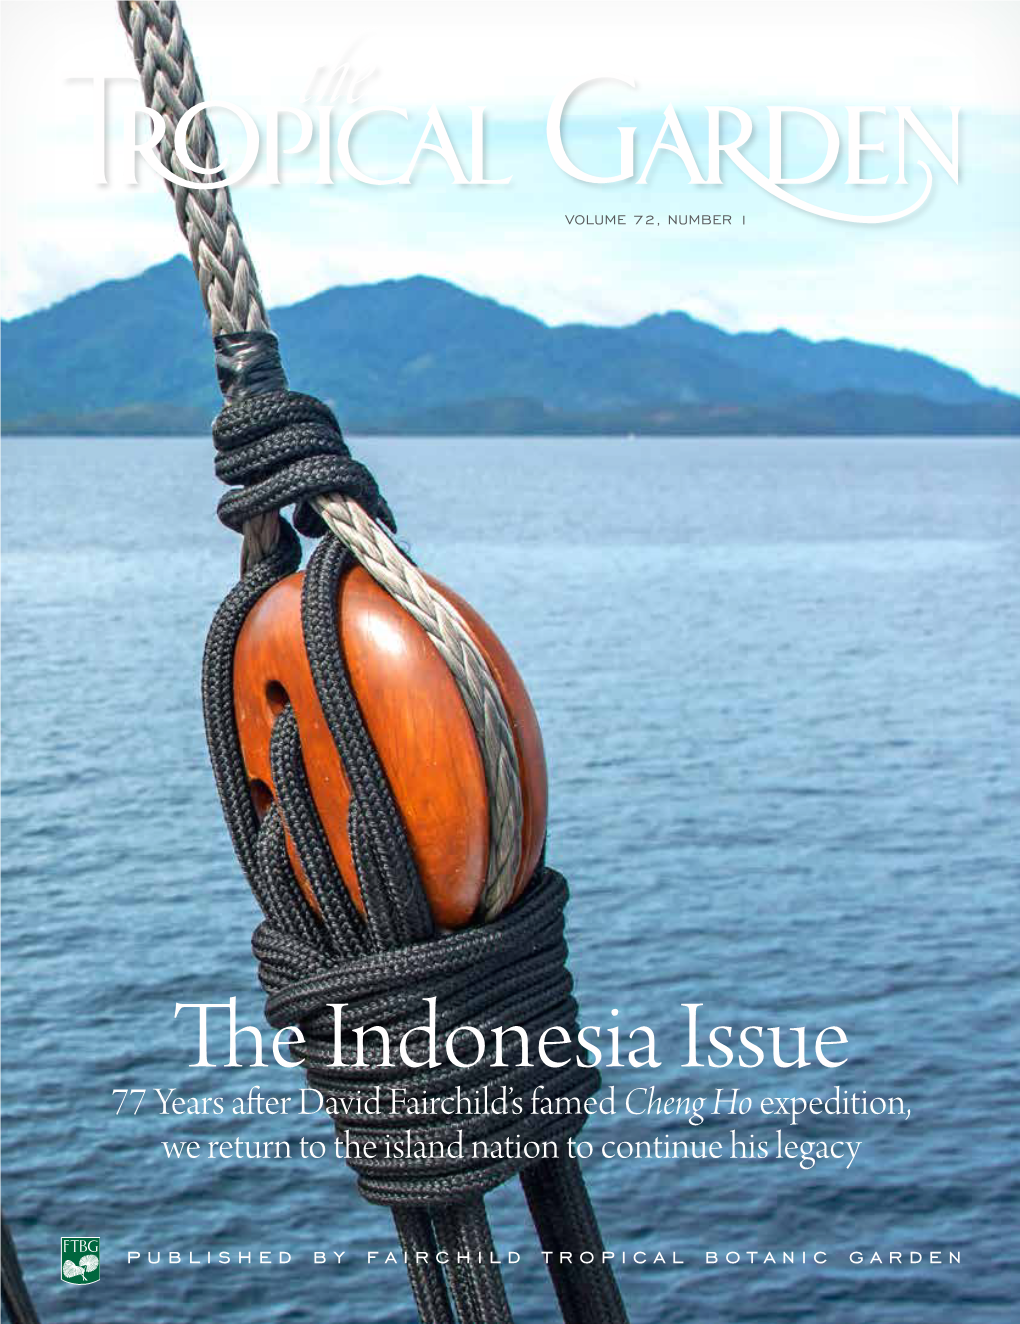 The Indonesia Issue 77 Years After David Fairchild’S Famedcheng Ho Expedition, We Return to the Island Nation to Continue His Legacy